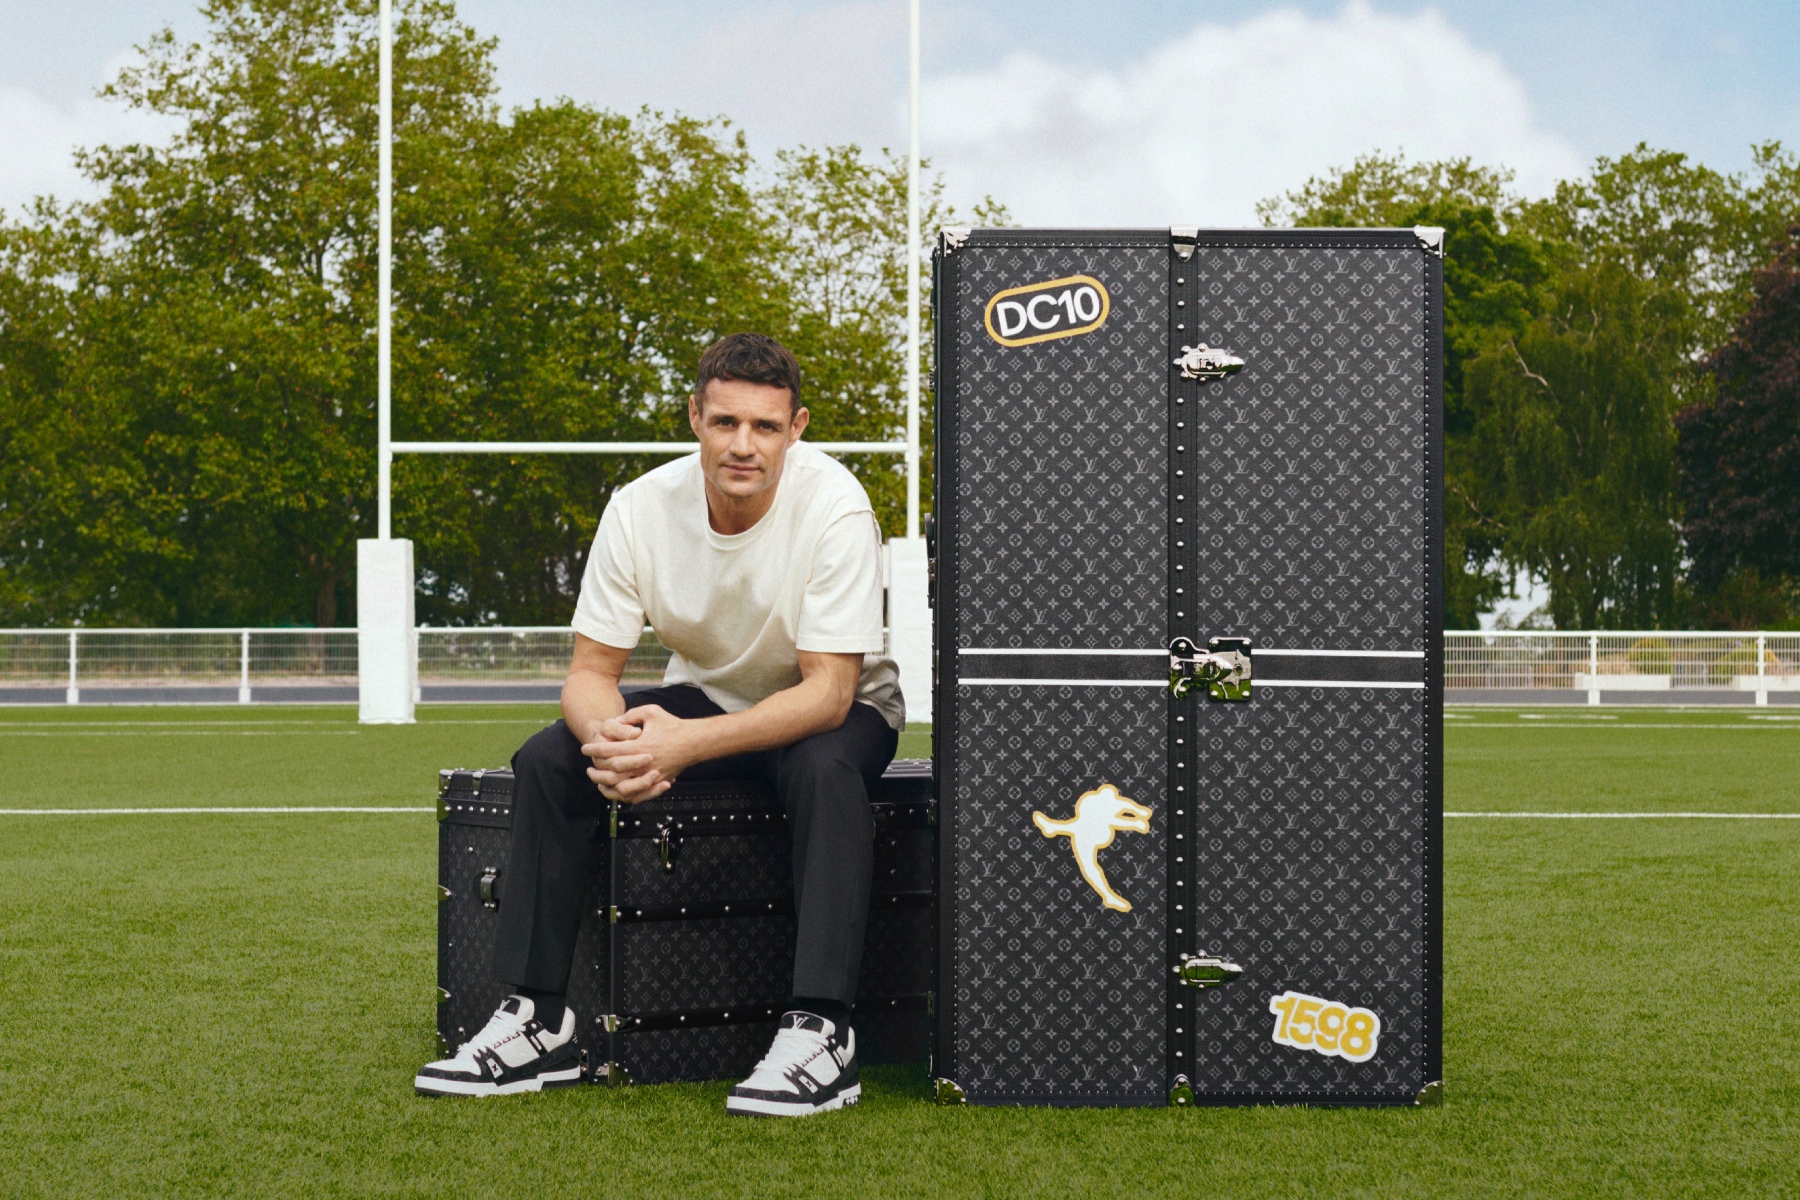 Louis Vuitton Launches Its First Ever Rugby Ball with Dan Carter